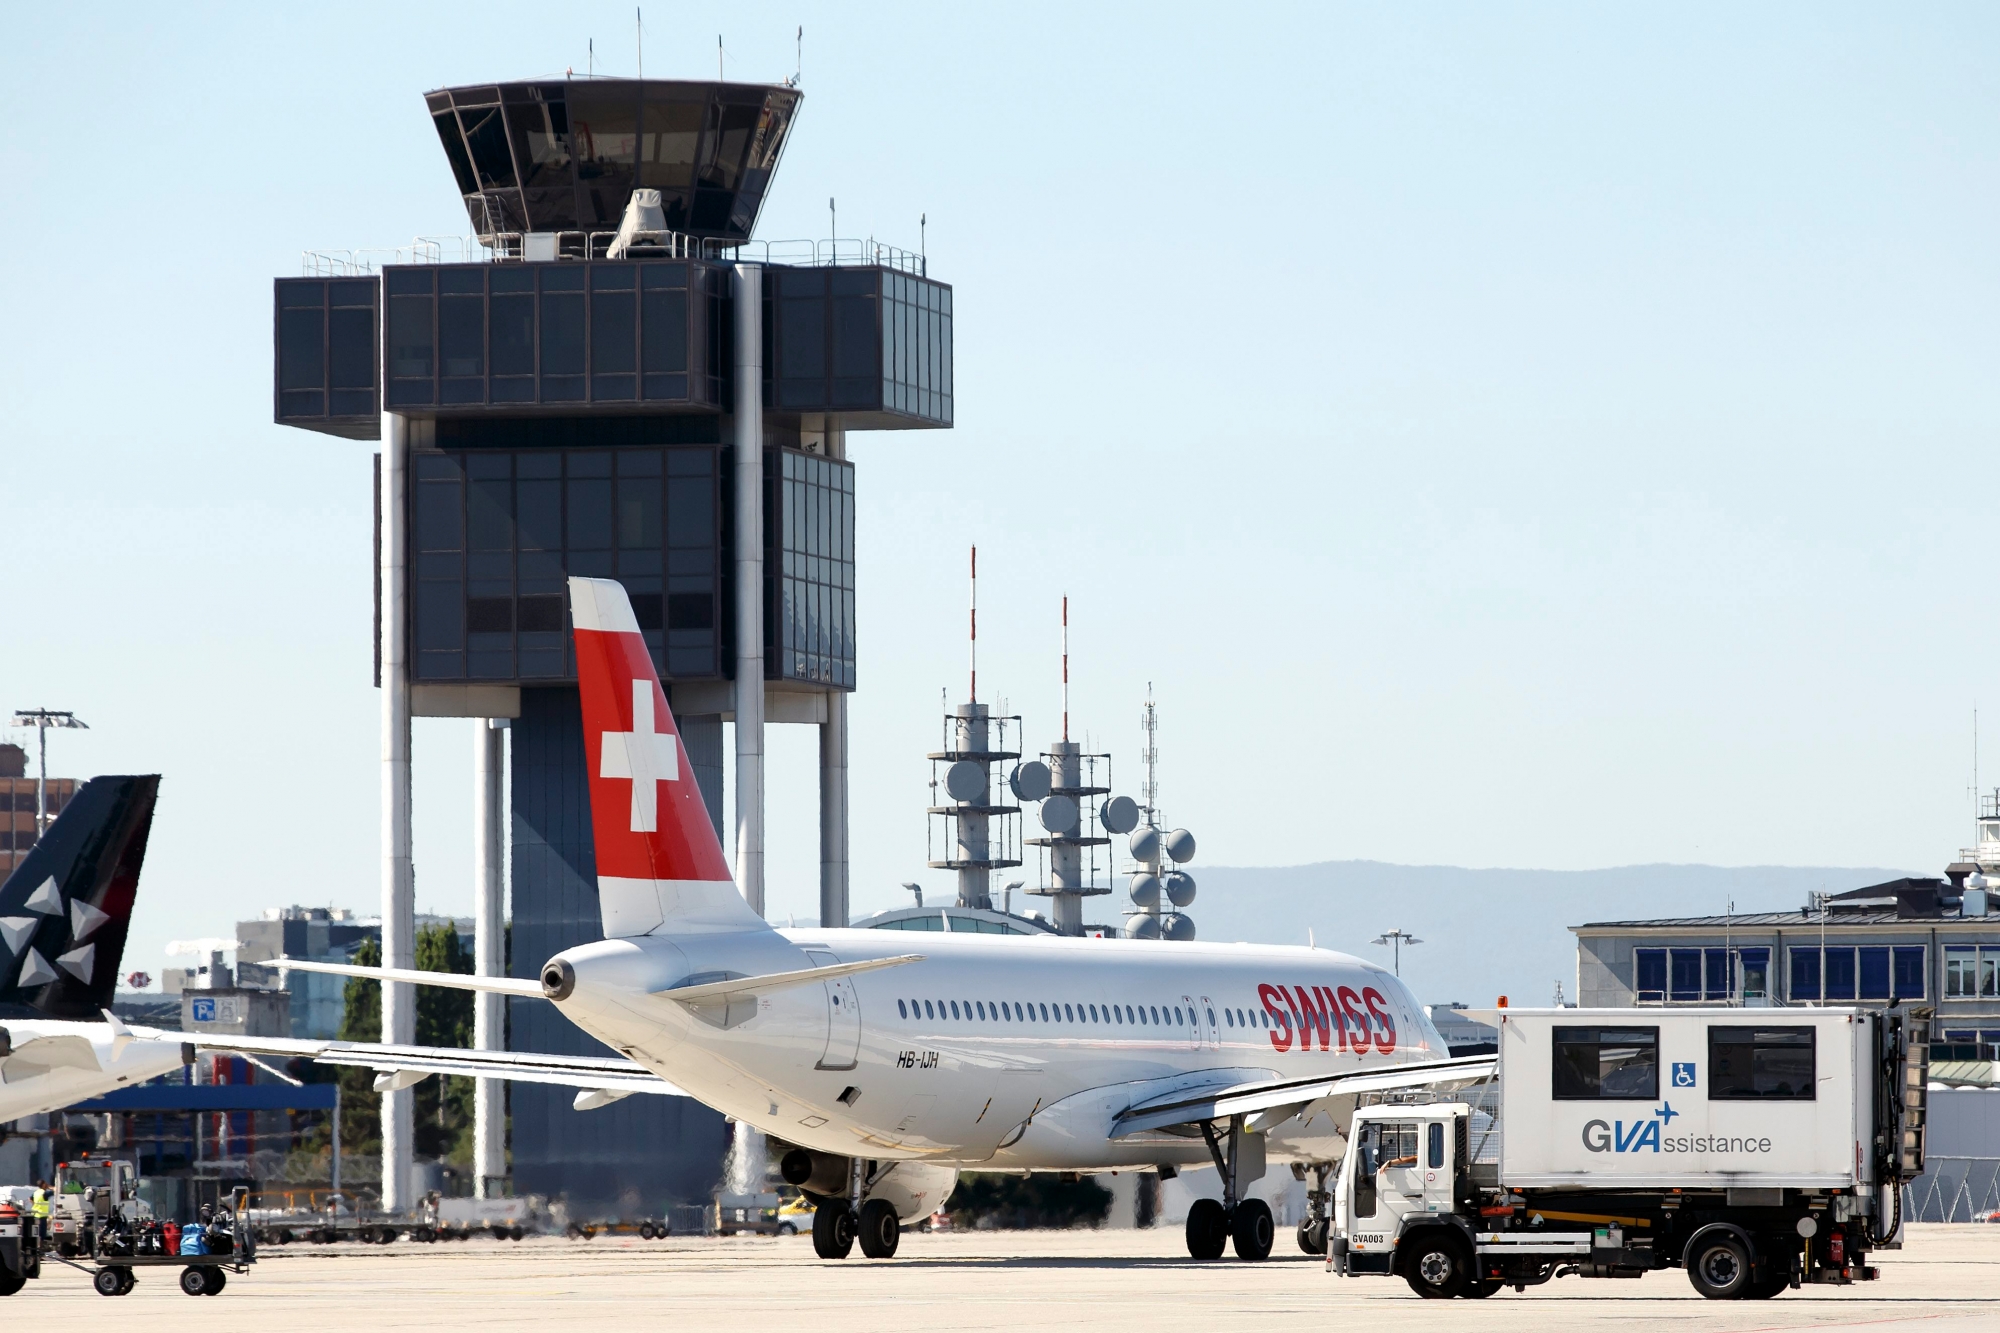 An aircraft (Airbus A320 HB-IJH) of the Swiss International Air Lines runs on taxiway at the Geneva Airport, in Geneva, Switzerland, Wednesday, August 24, 2016. The Swiss airline company evaluates its presence at the airport of Geneva, where its profitability targets have yet been achieved. A decision should fall in the next two to three years. (KEYSTONE/Salvatore Di Nolfi) SWITZERLAND SWISS GENEVA AIRPORT